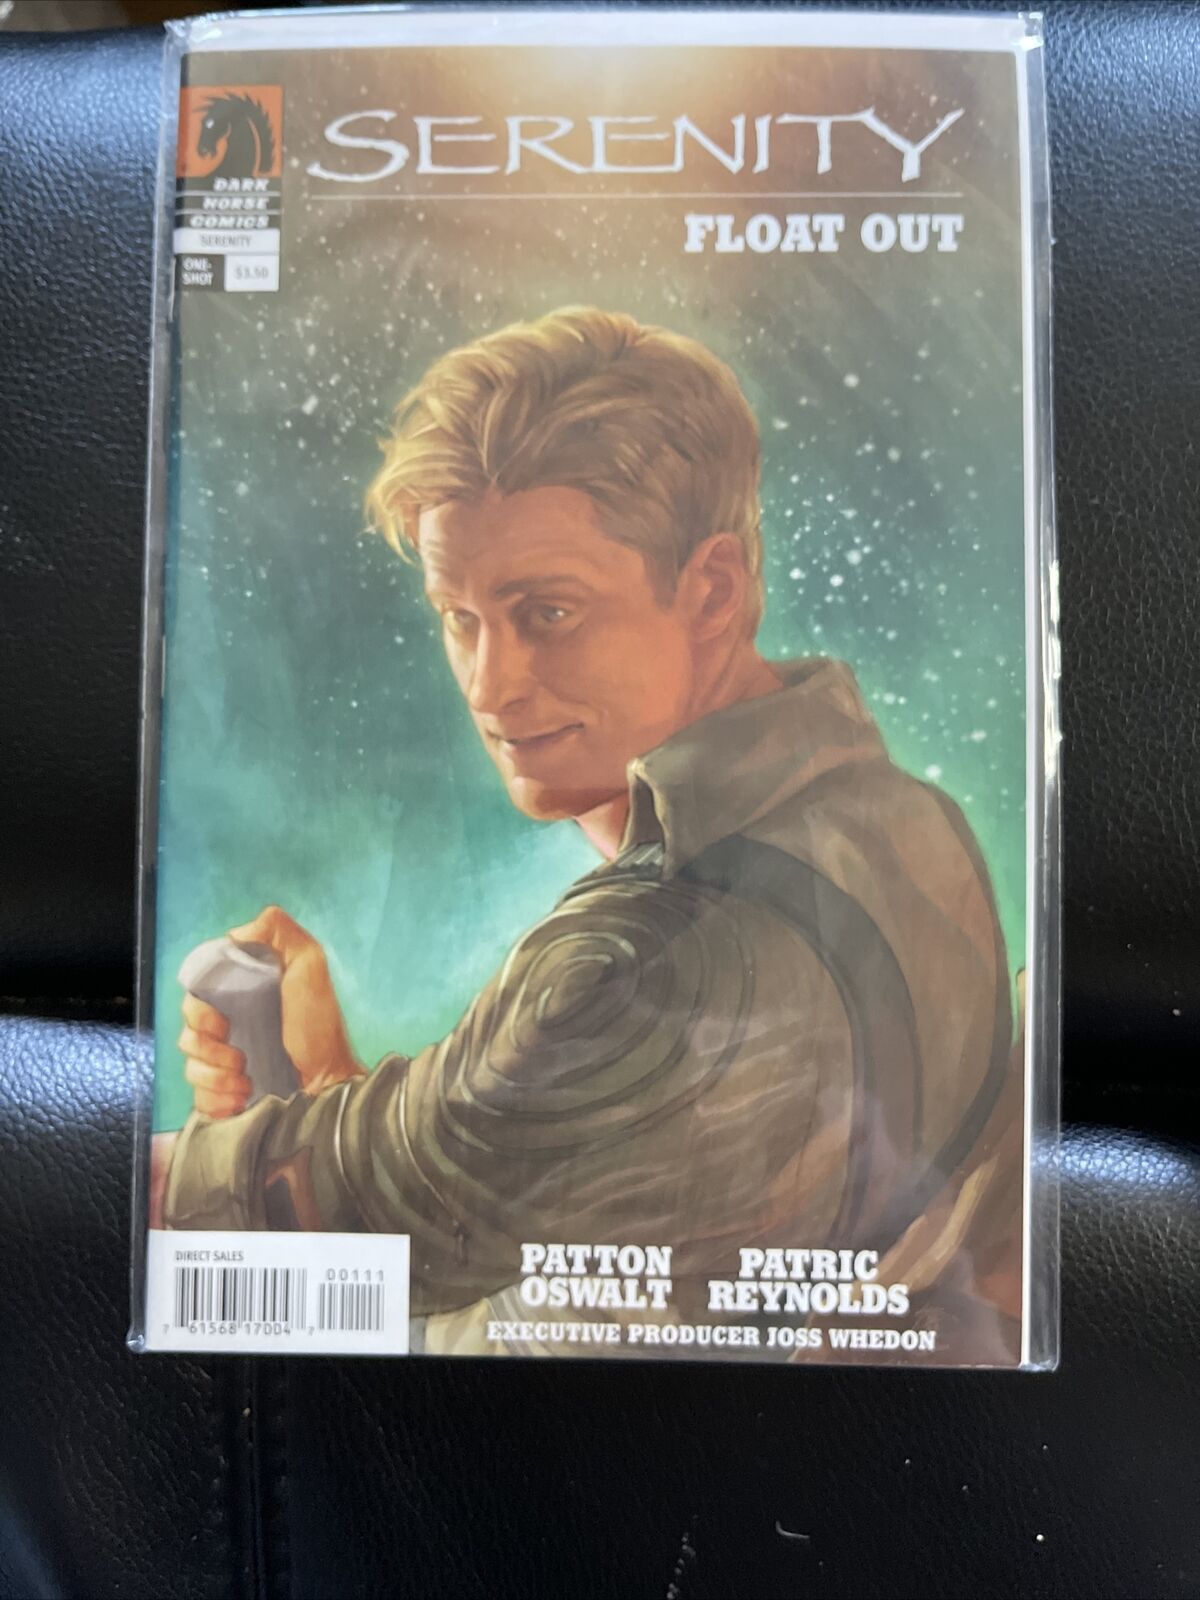 Serenity: Float Out #1 Variant Cover by Jo Chen - One Shot 2010 - Patton Oswalt